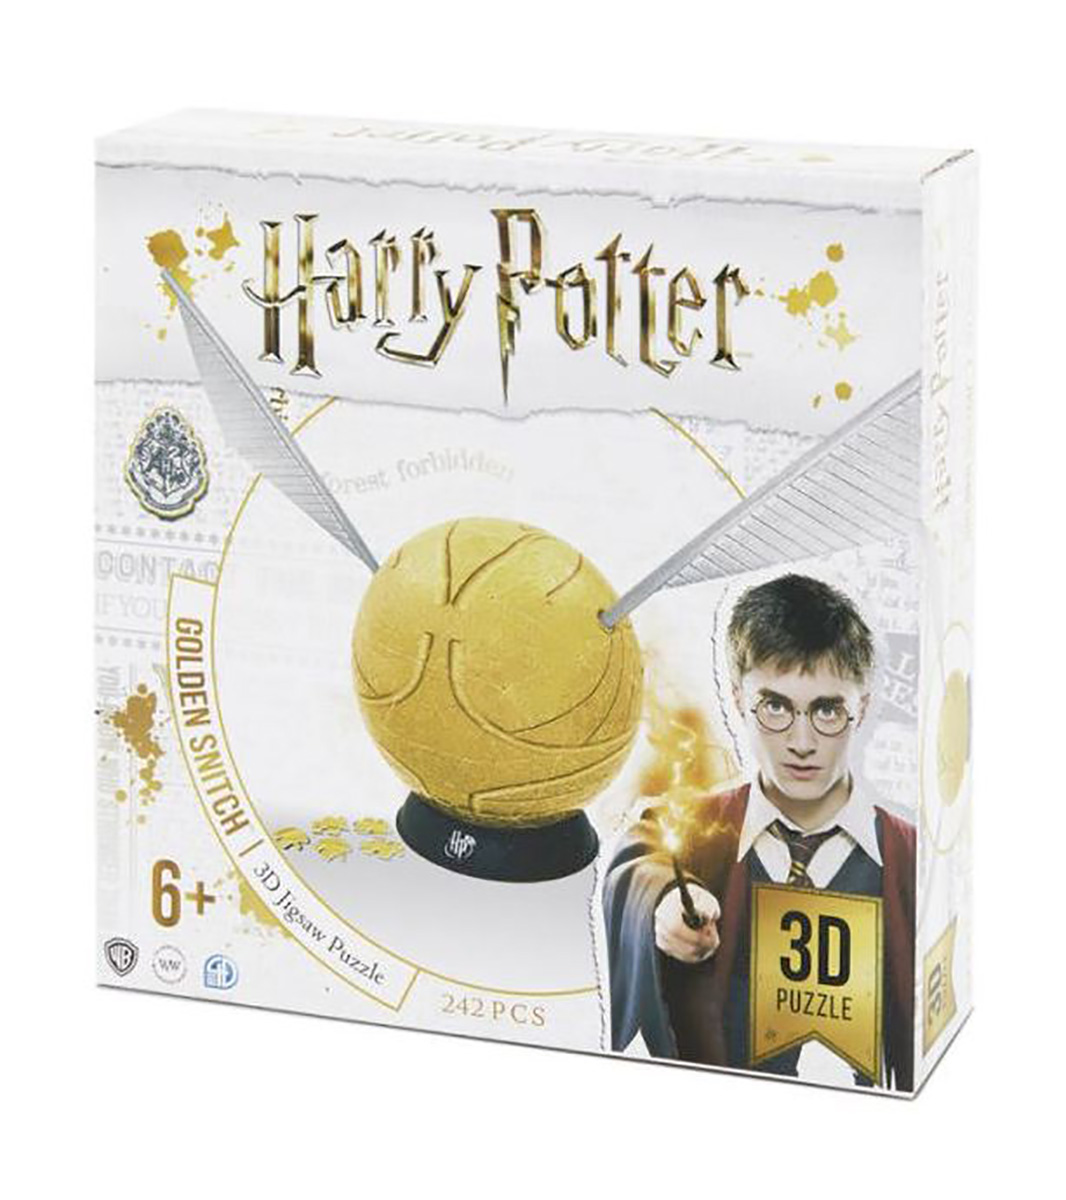 Harry Potter Snitch - Scratch and Dent Harry Potter Jigsaw Puzzle